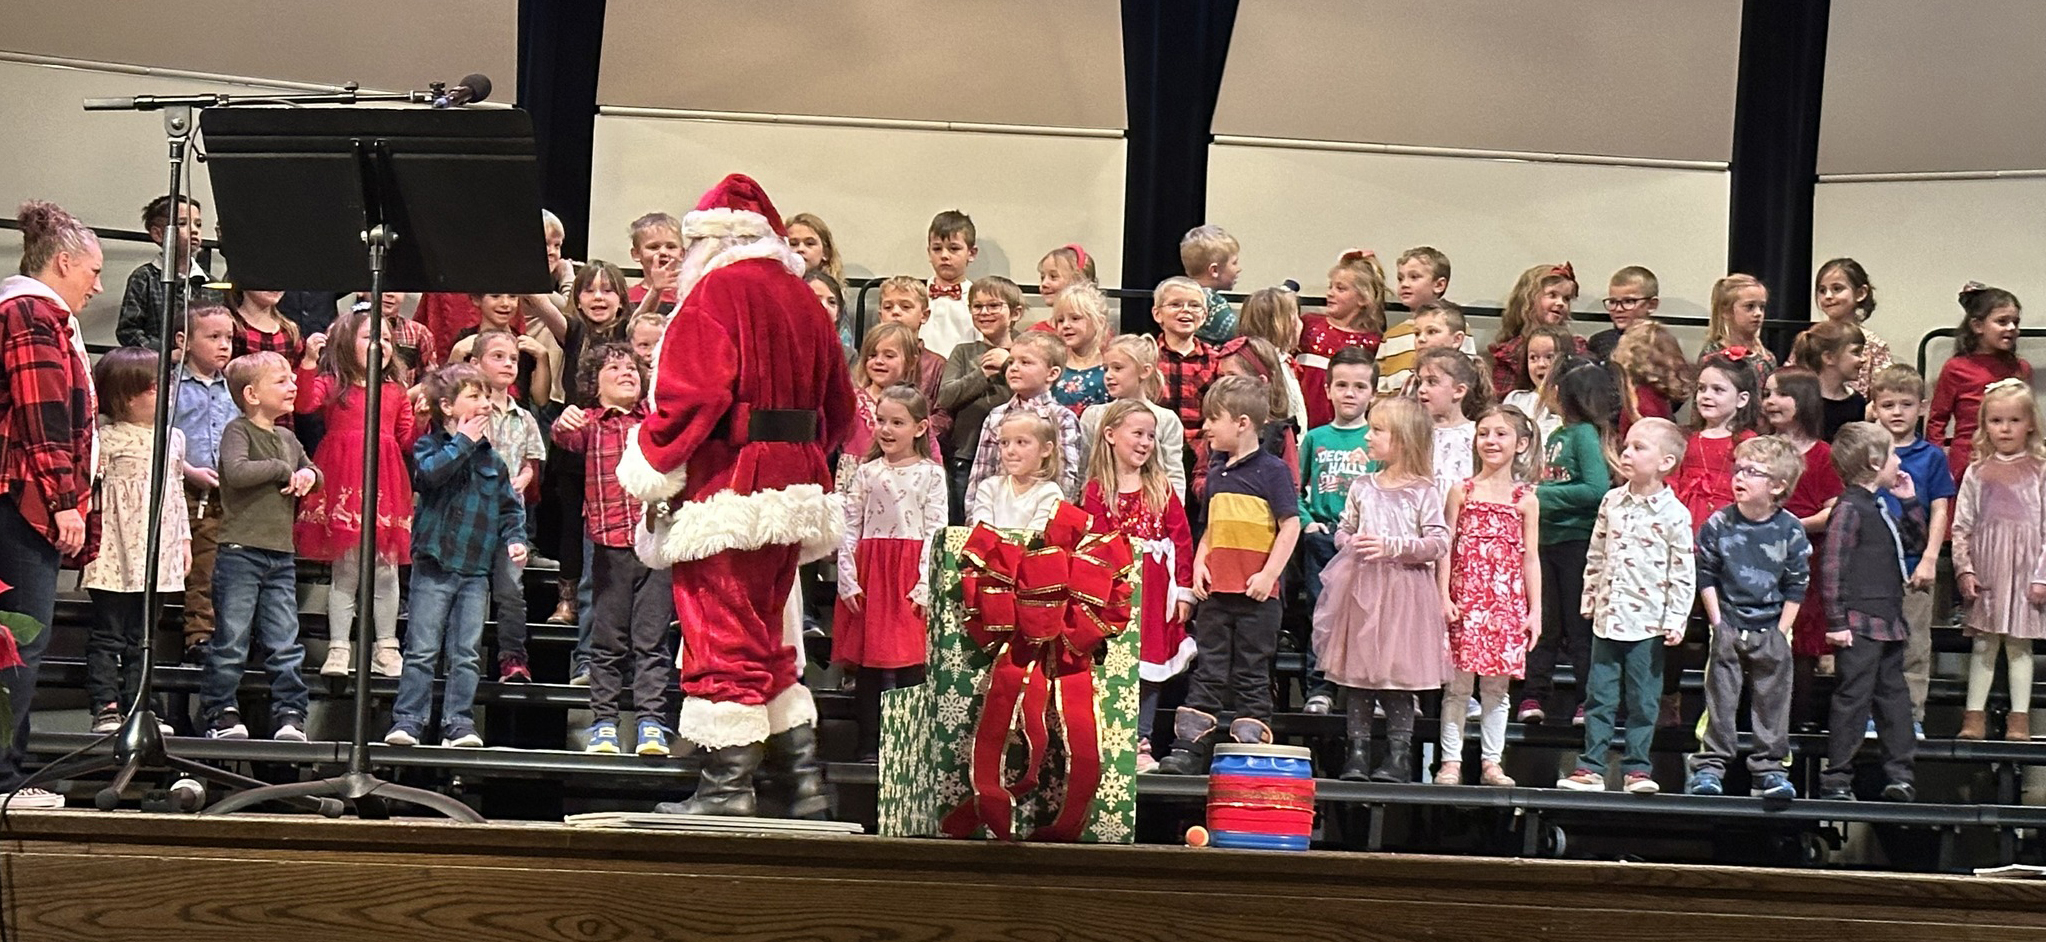 TES students perform holiday programs ‘Oh, the Possibilities’